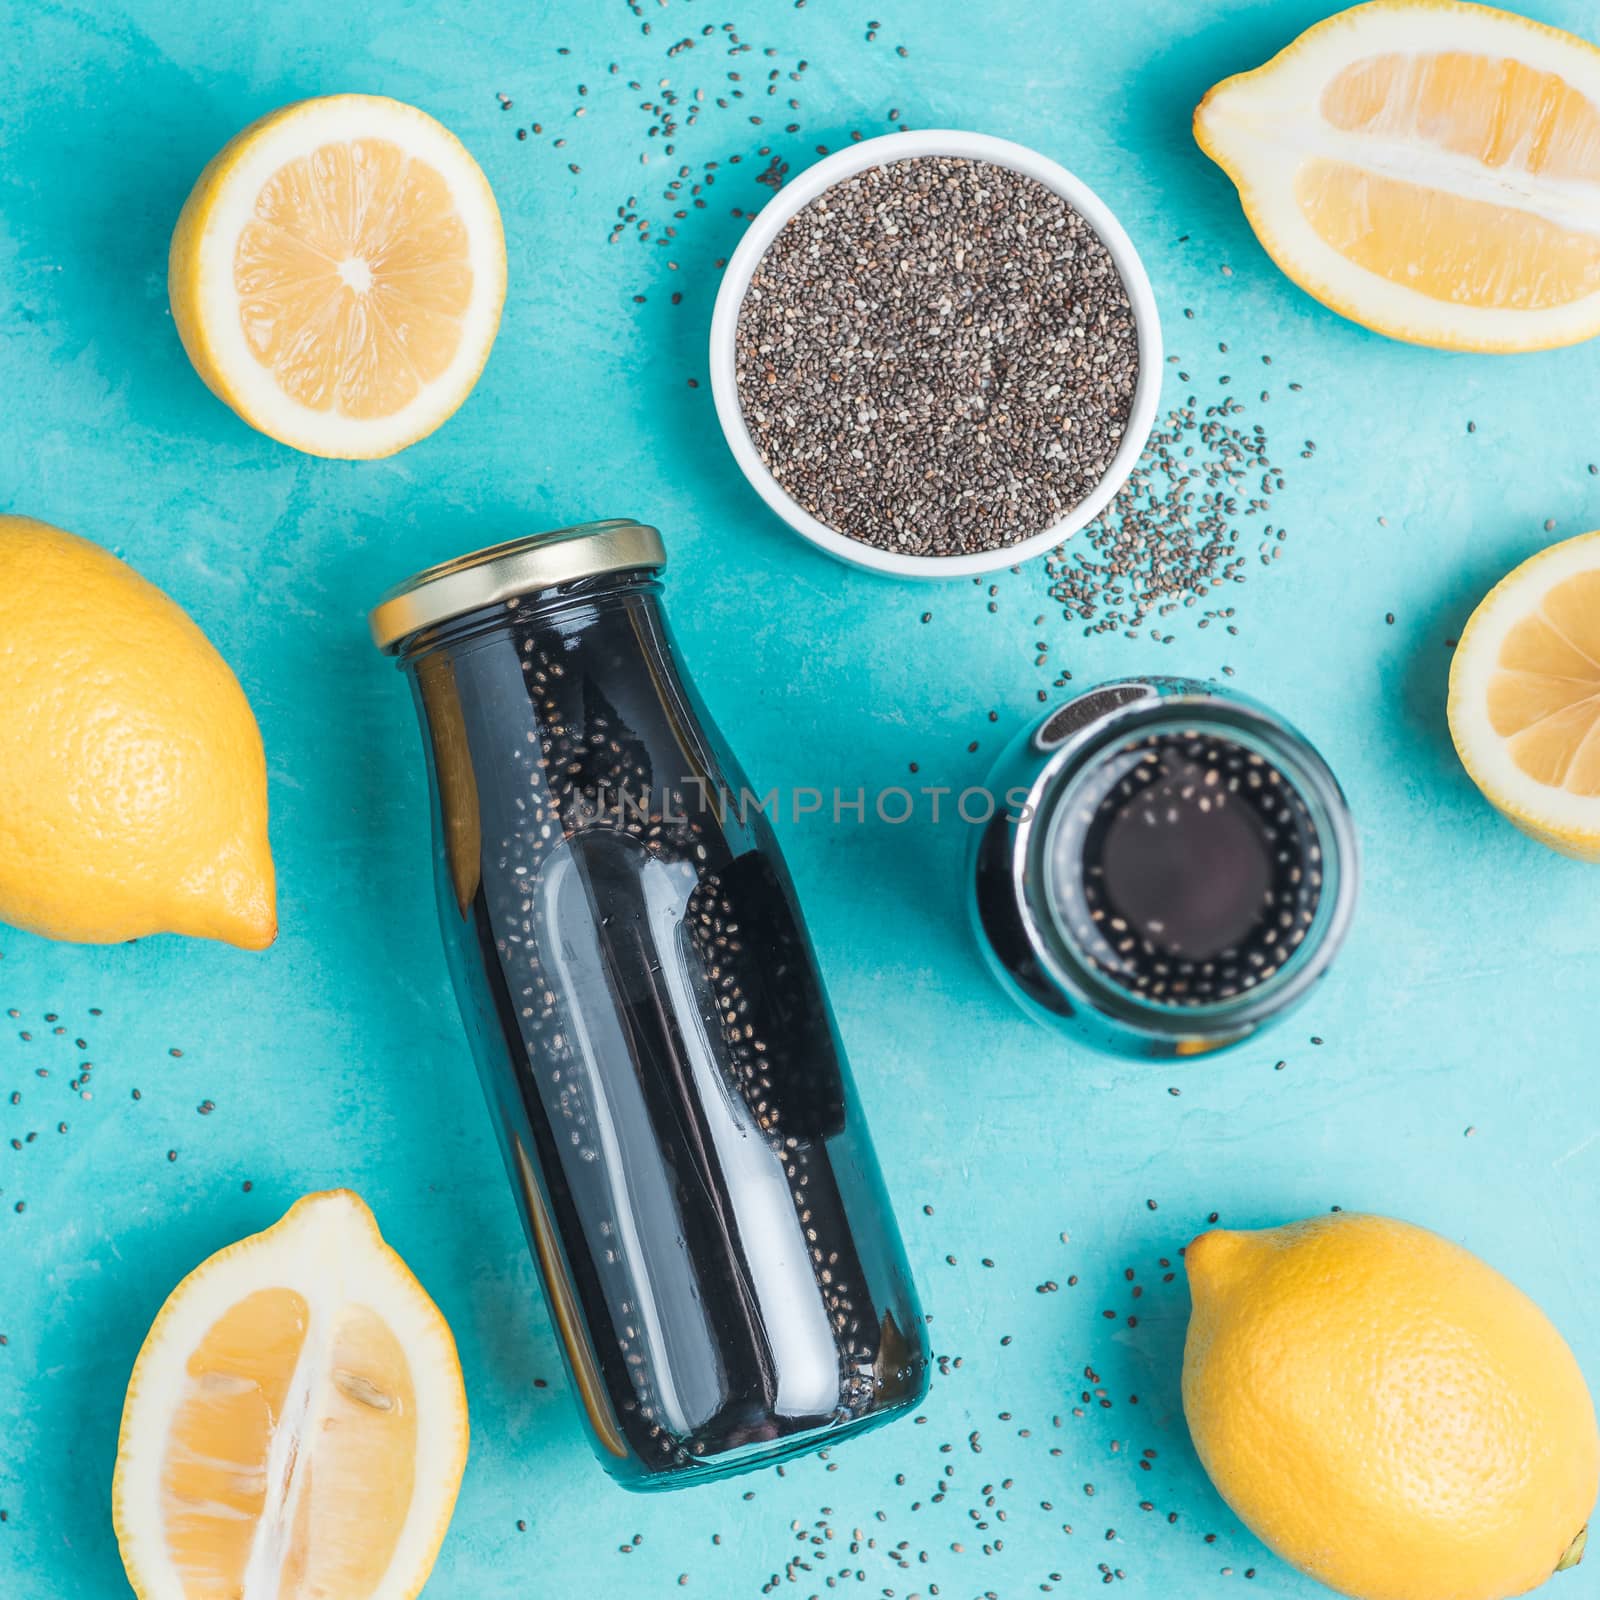 Detox activated charcoal black chia water or lemonade with lemon on bright blue background. Two bottle with black chia infused water. Detox drink idea and recipe. Vegan food and drink. Top view.